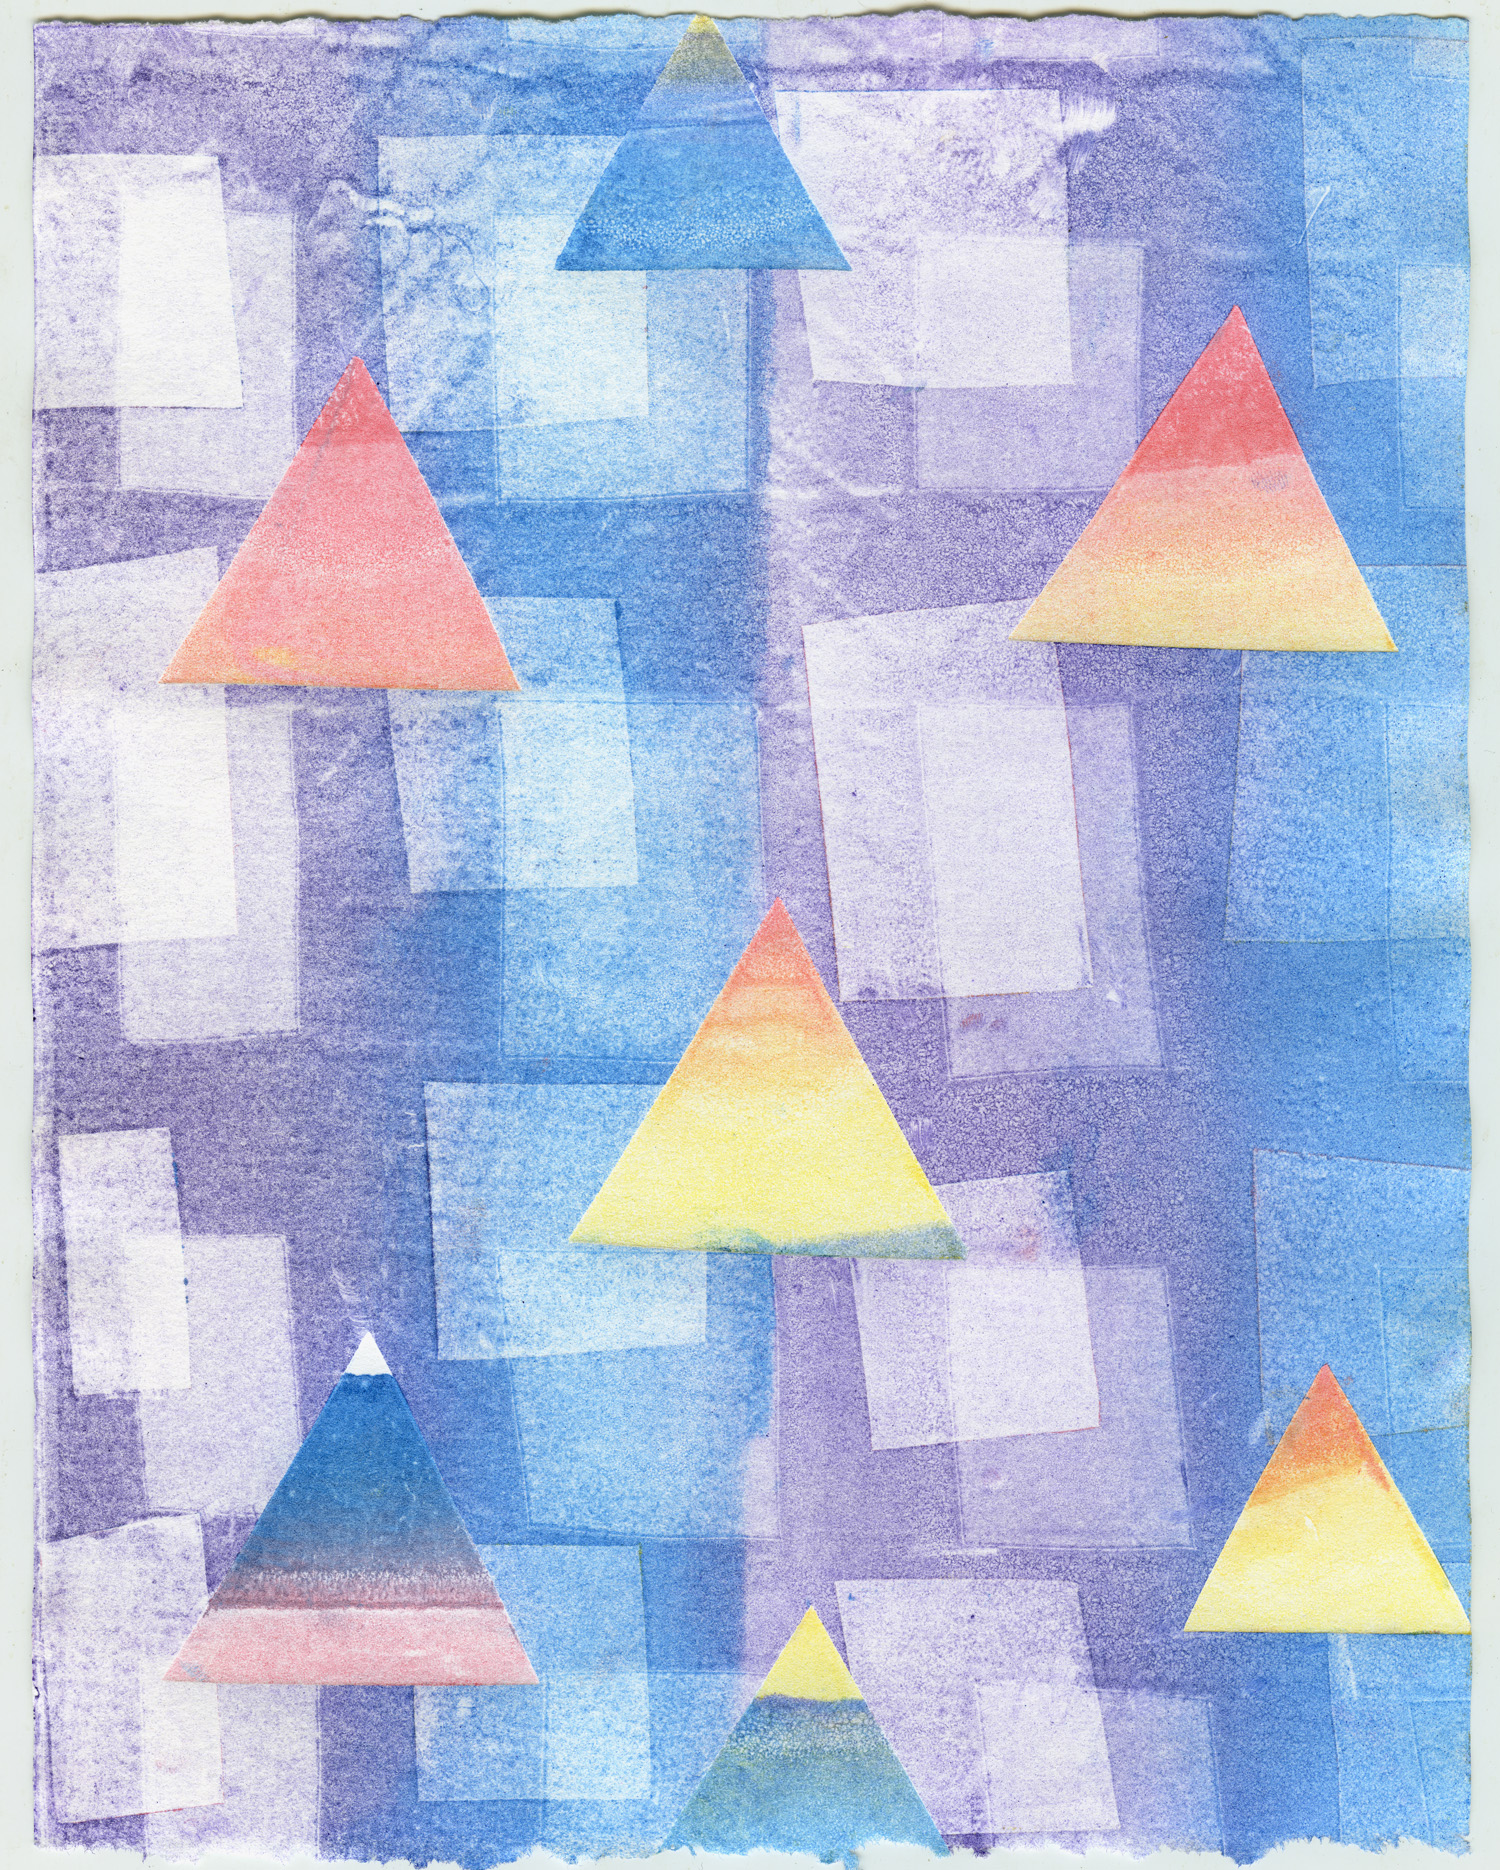 Untitled Triangles